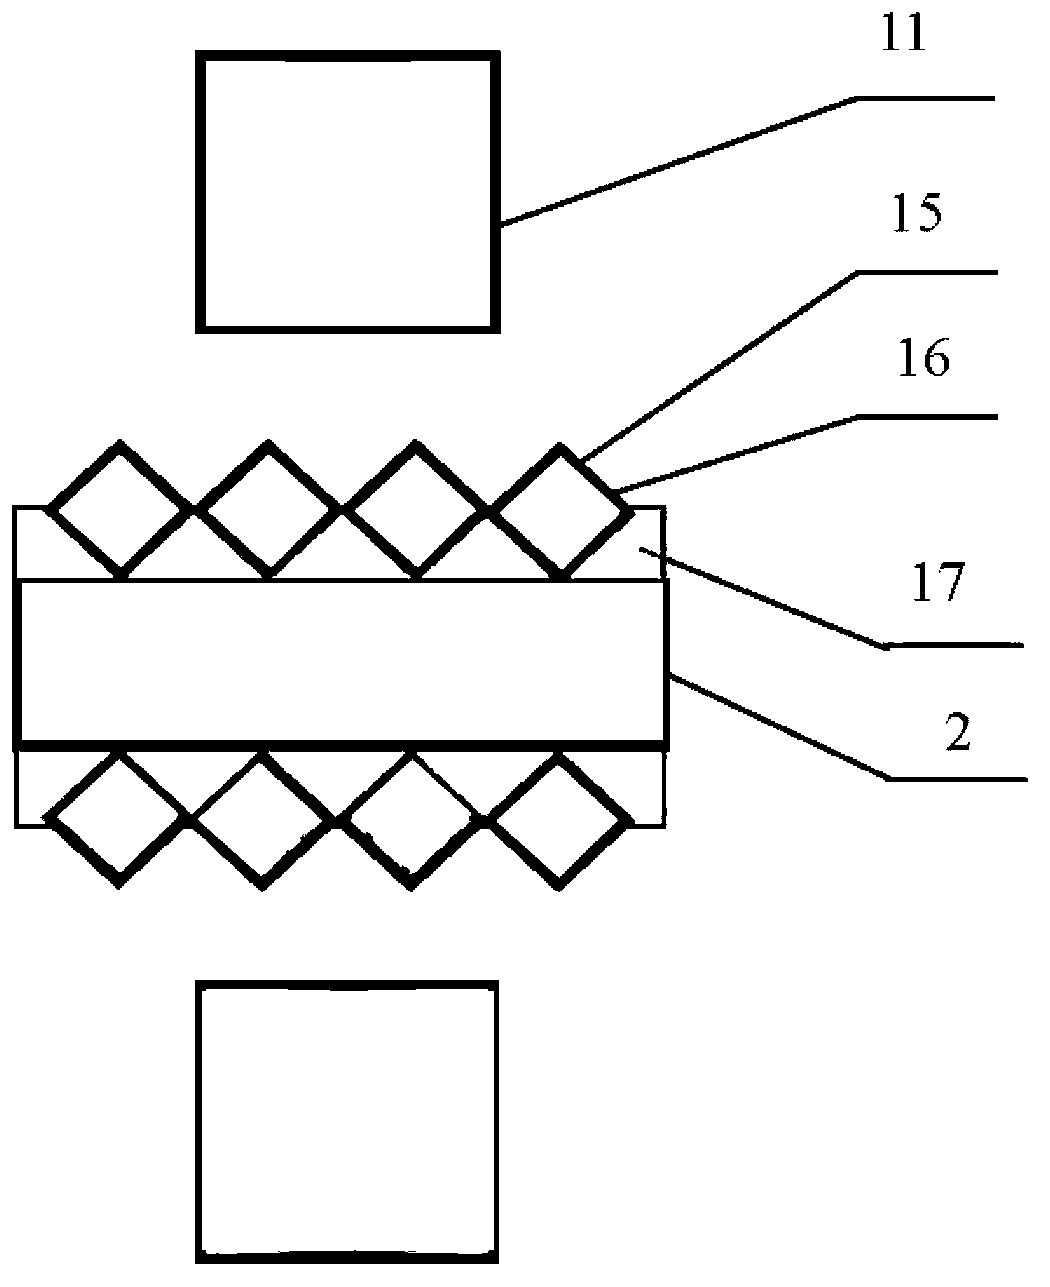 Method for producing resin diamond wire